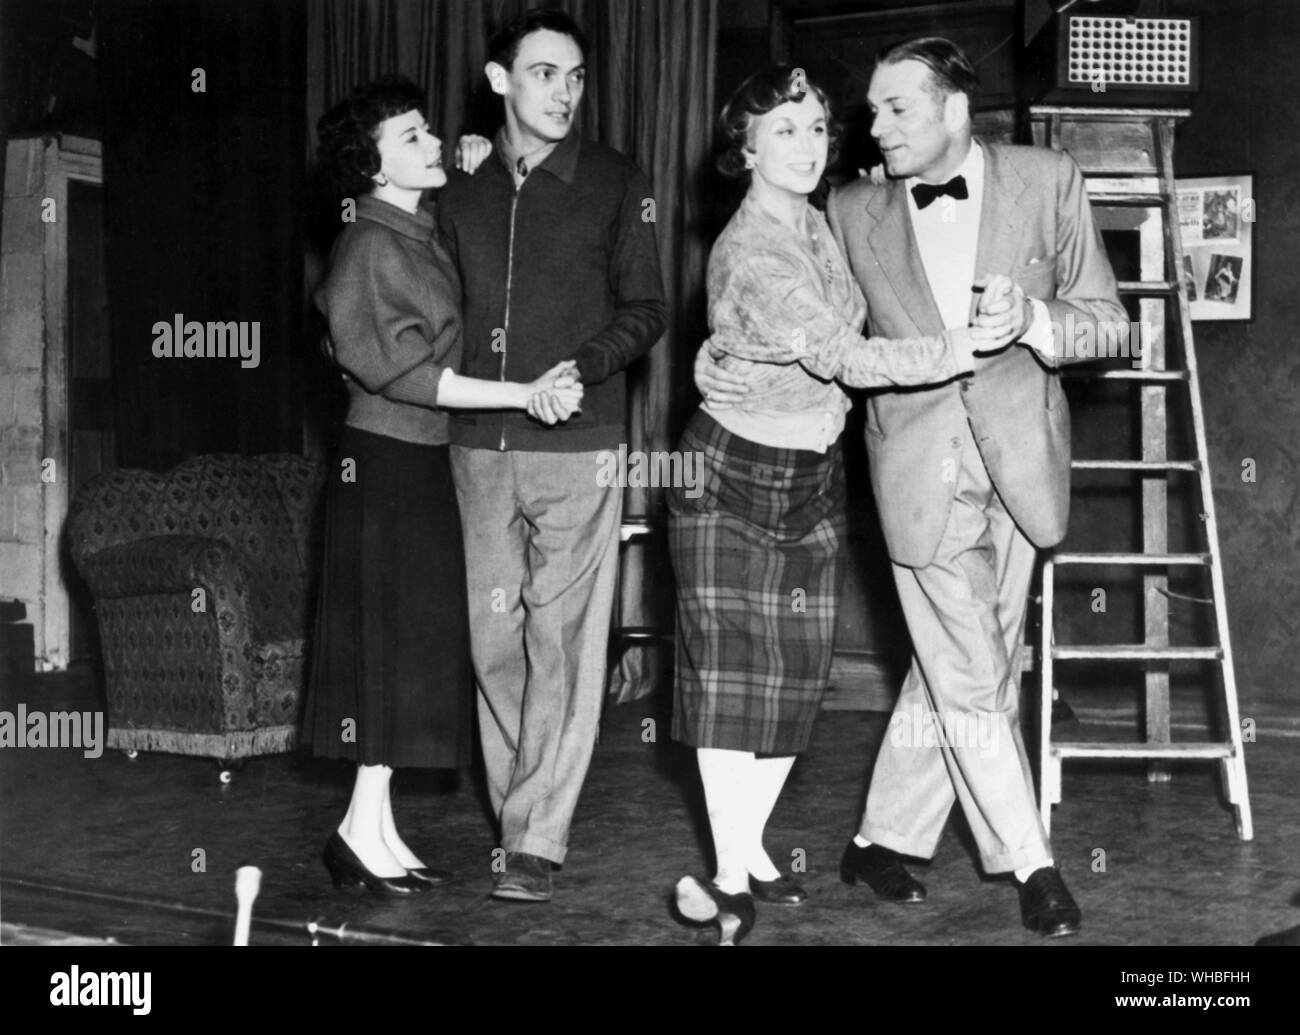 The Entertainer by John Osbourne : The main character Archie Rice here played by Sir Laurence Olivier , Royal Court Theatre 1957 . Also rehearsing with Olivier are far left- Geraldine McEwan , Richard Pascoe and Brenda De Banzie . Stock Photo